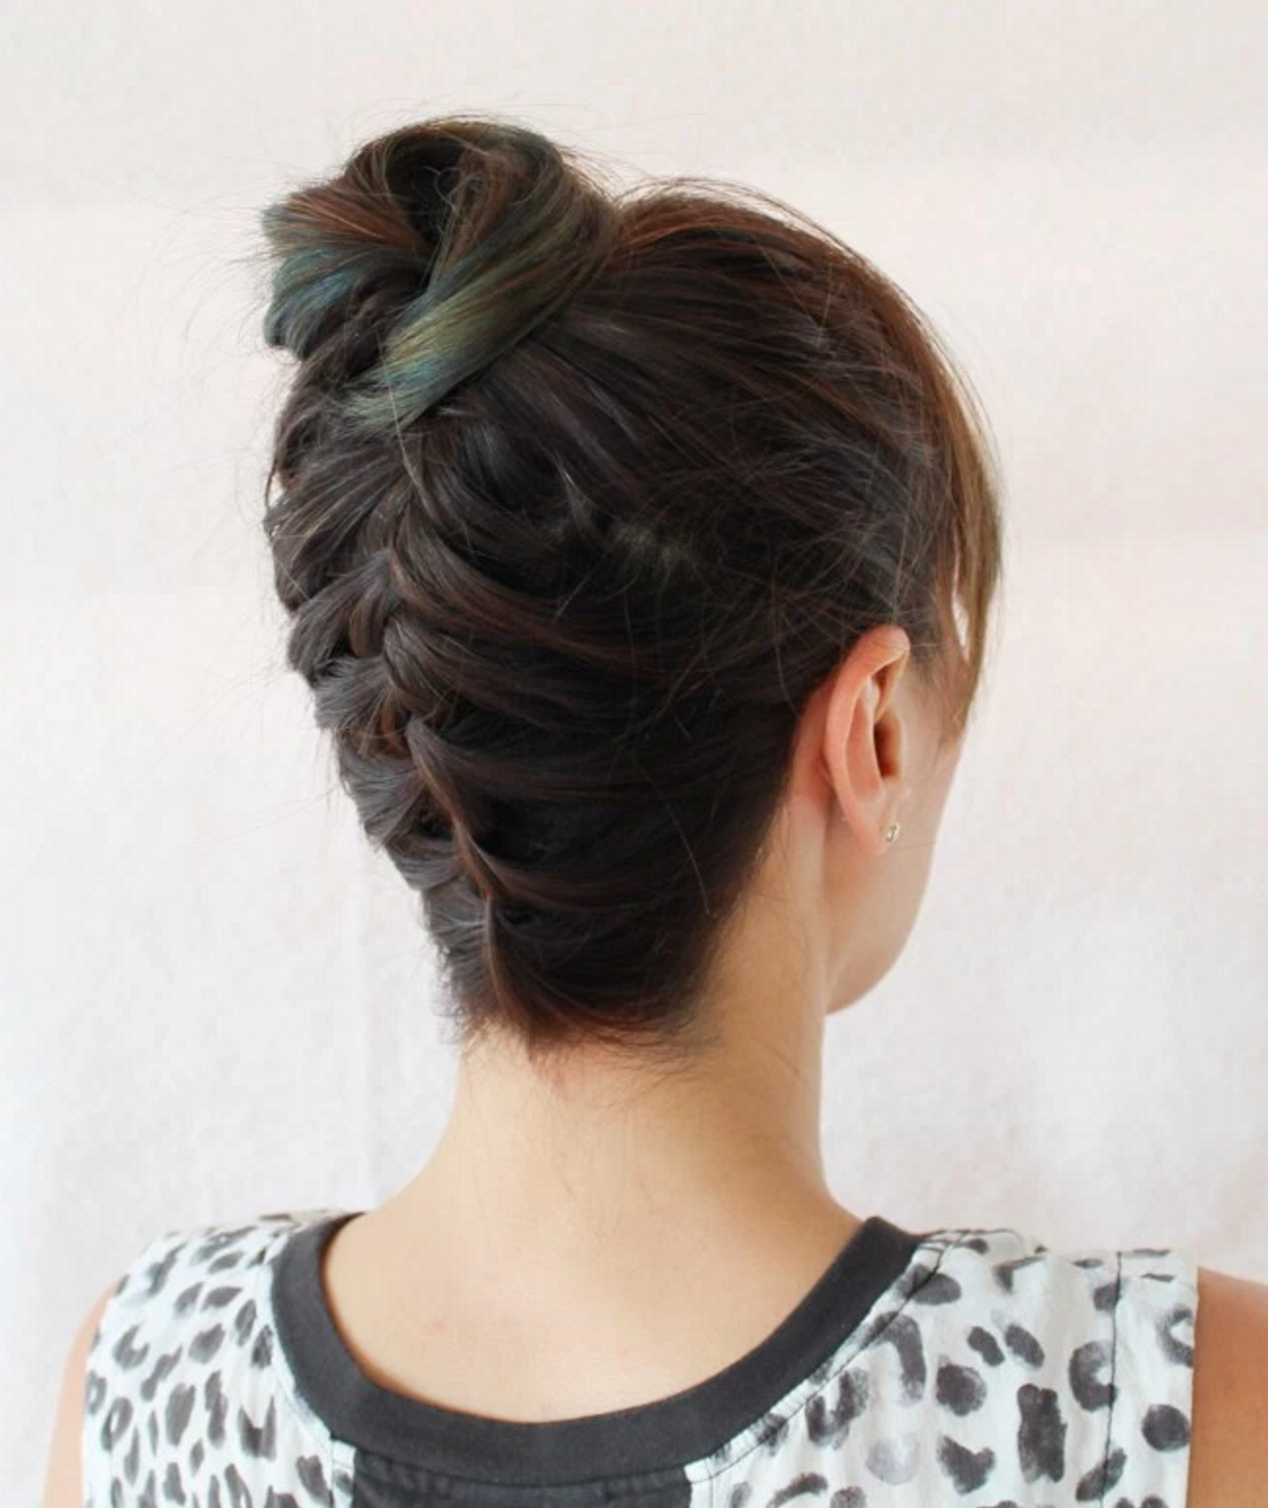 18 braided top knot